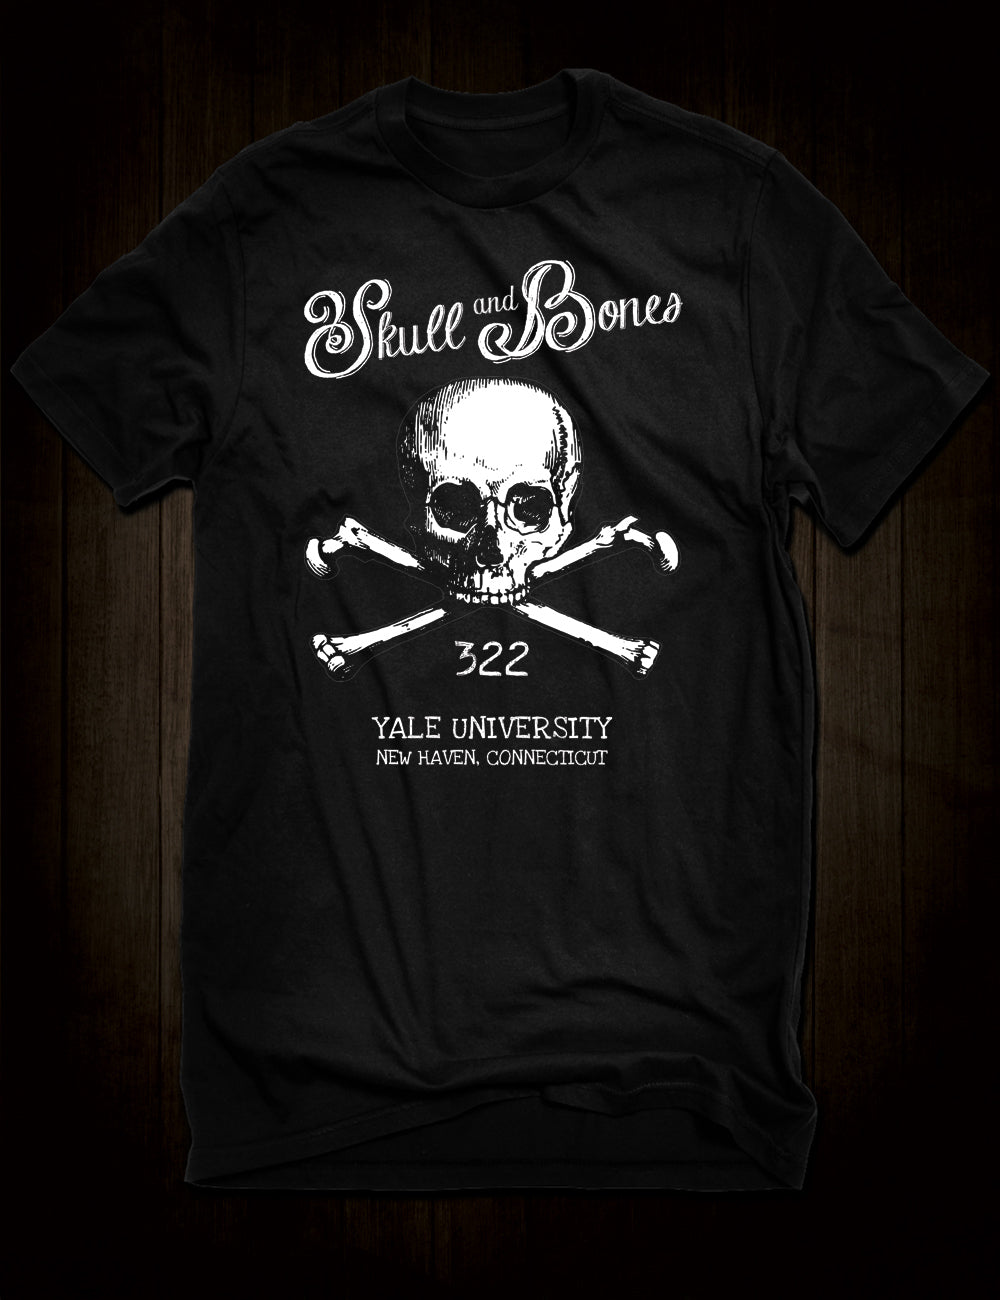 Skull And Bones T-Shirt from Hellwood – Hellwood Outfitters